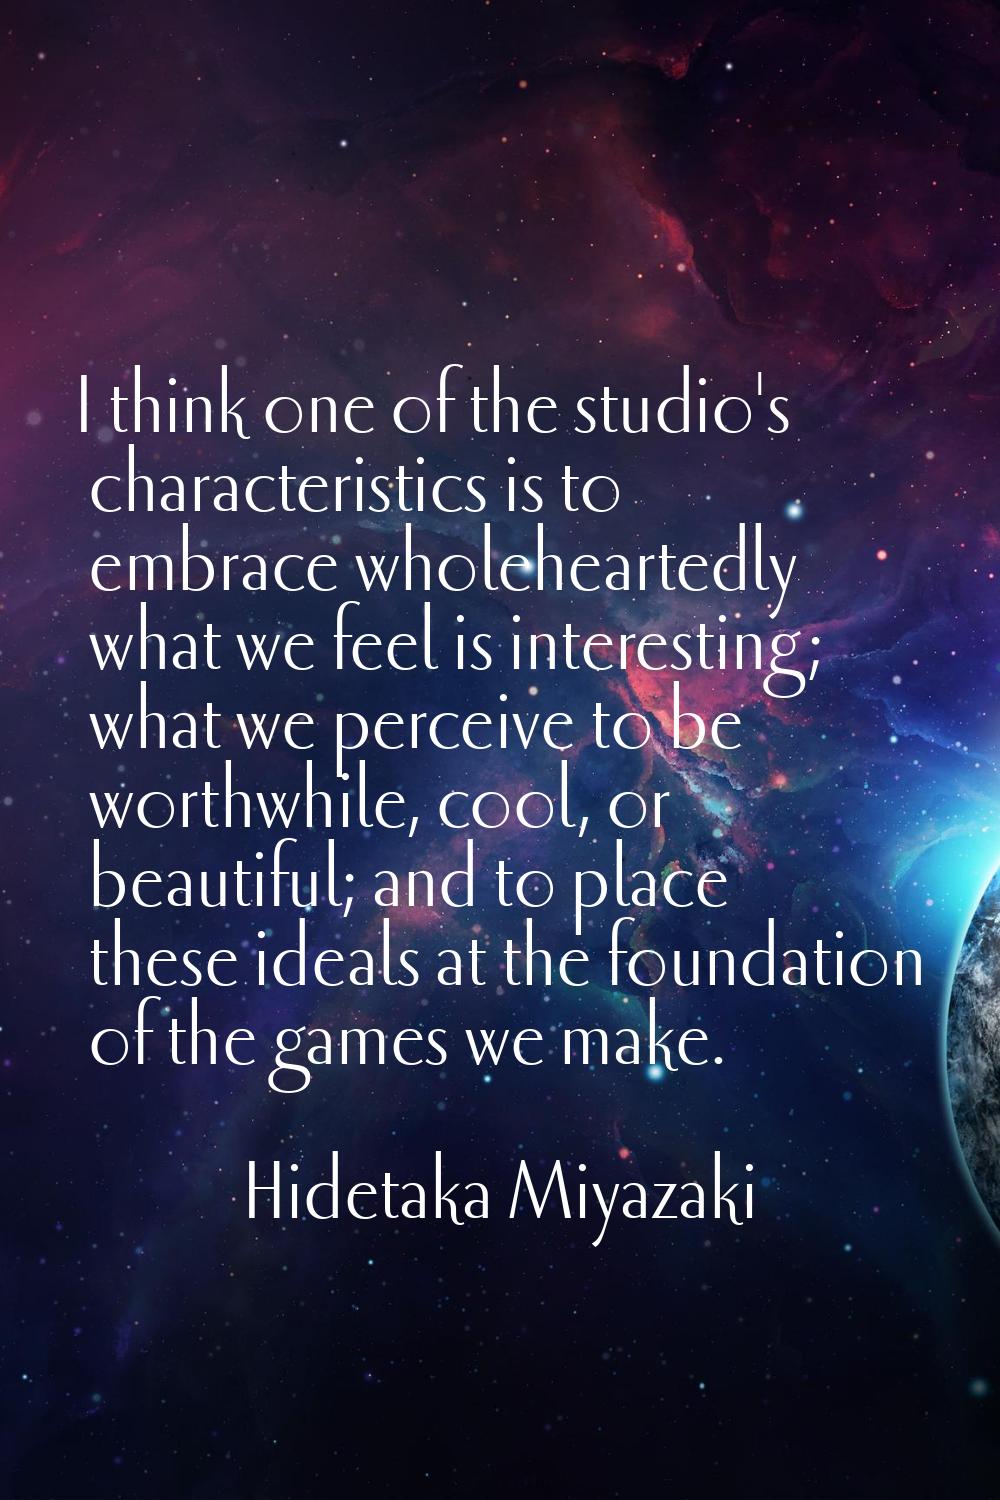 I think one of the studio's characteristics is to embrace wholeheartedly what we feel is interestin